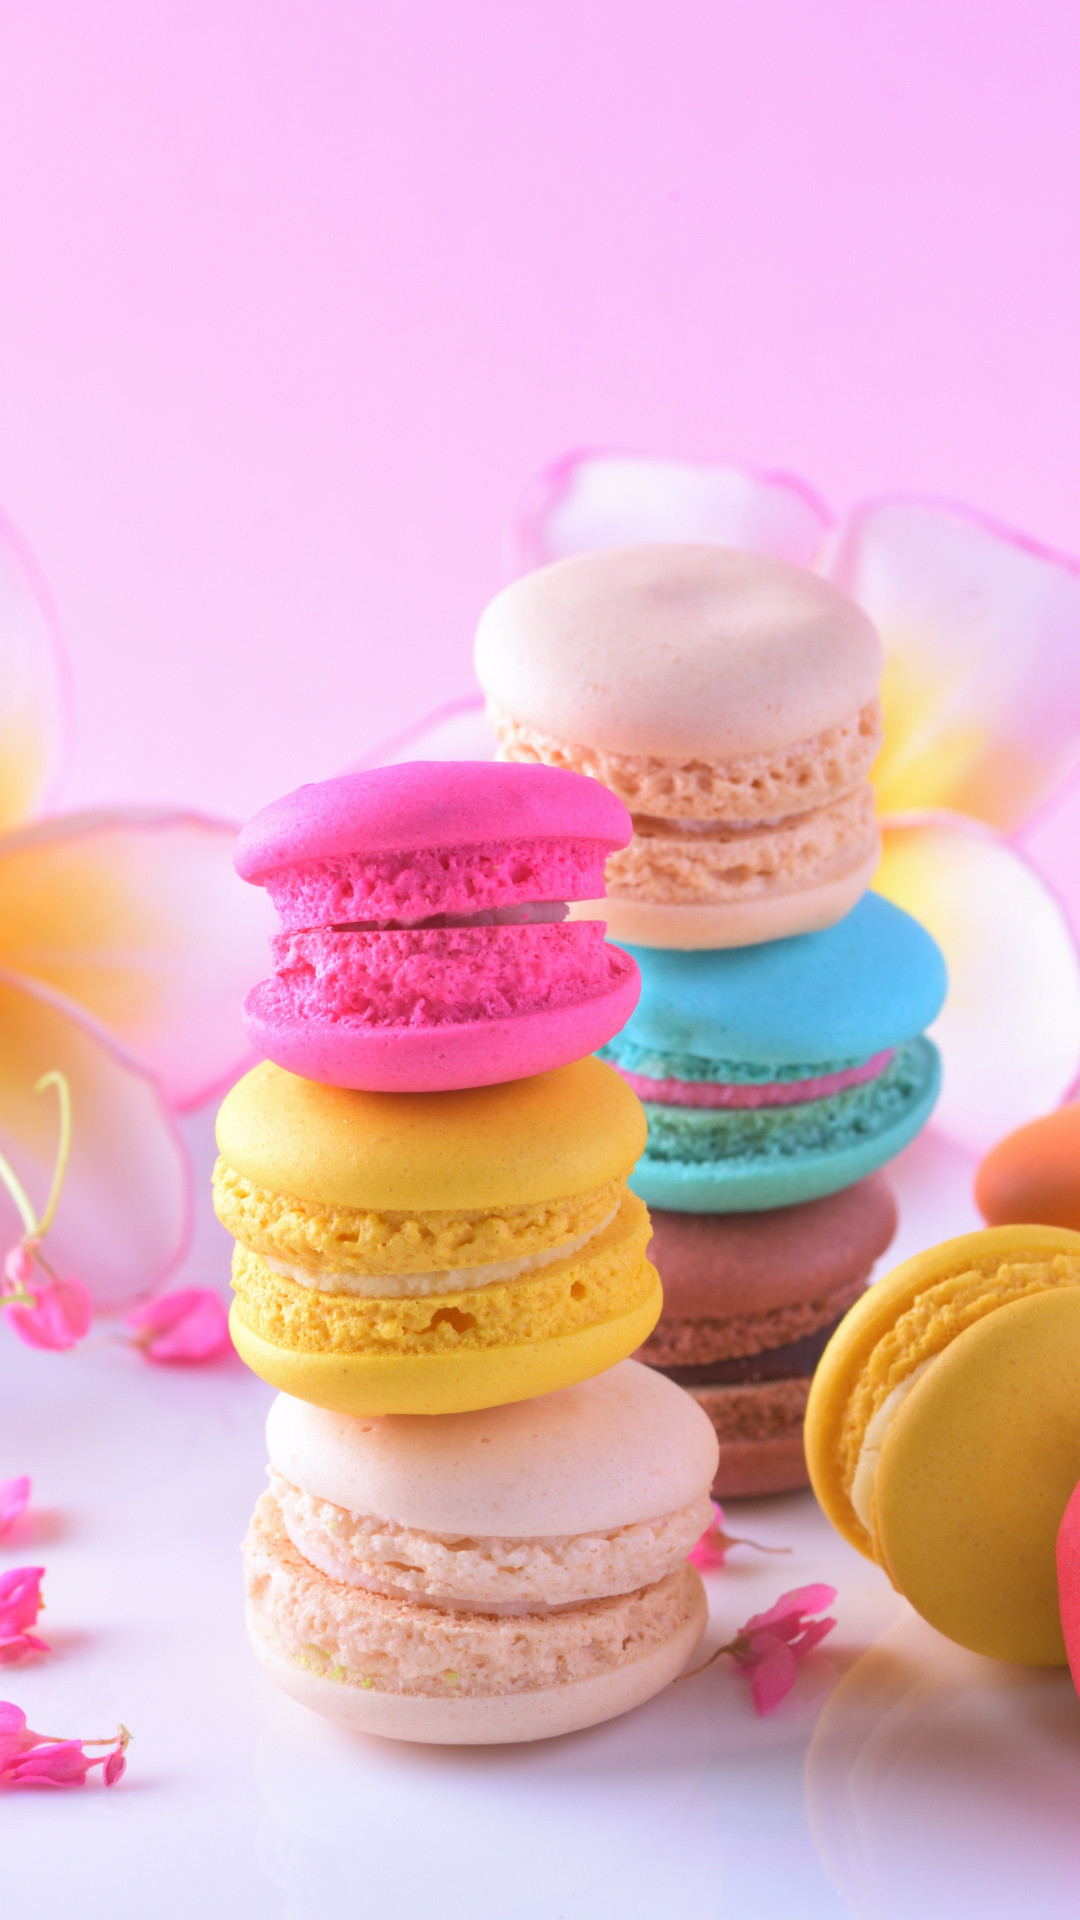 1080x1920  wallpaper Macarons, yummy, sweets, colorful